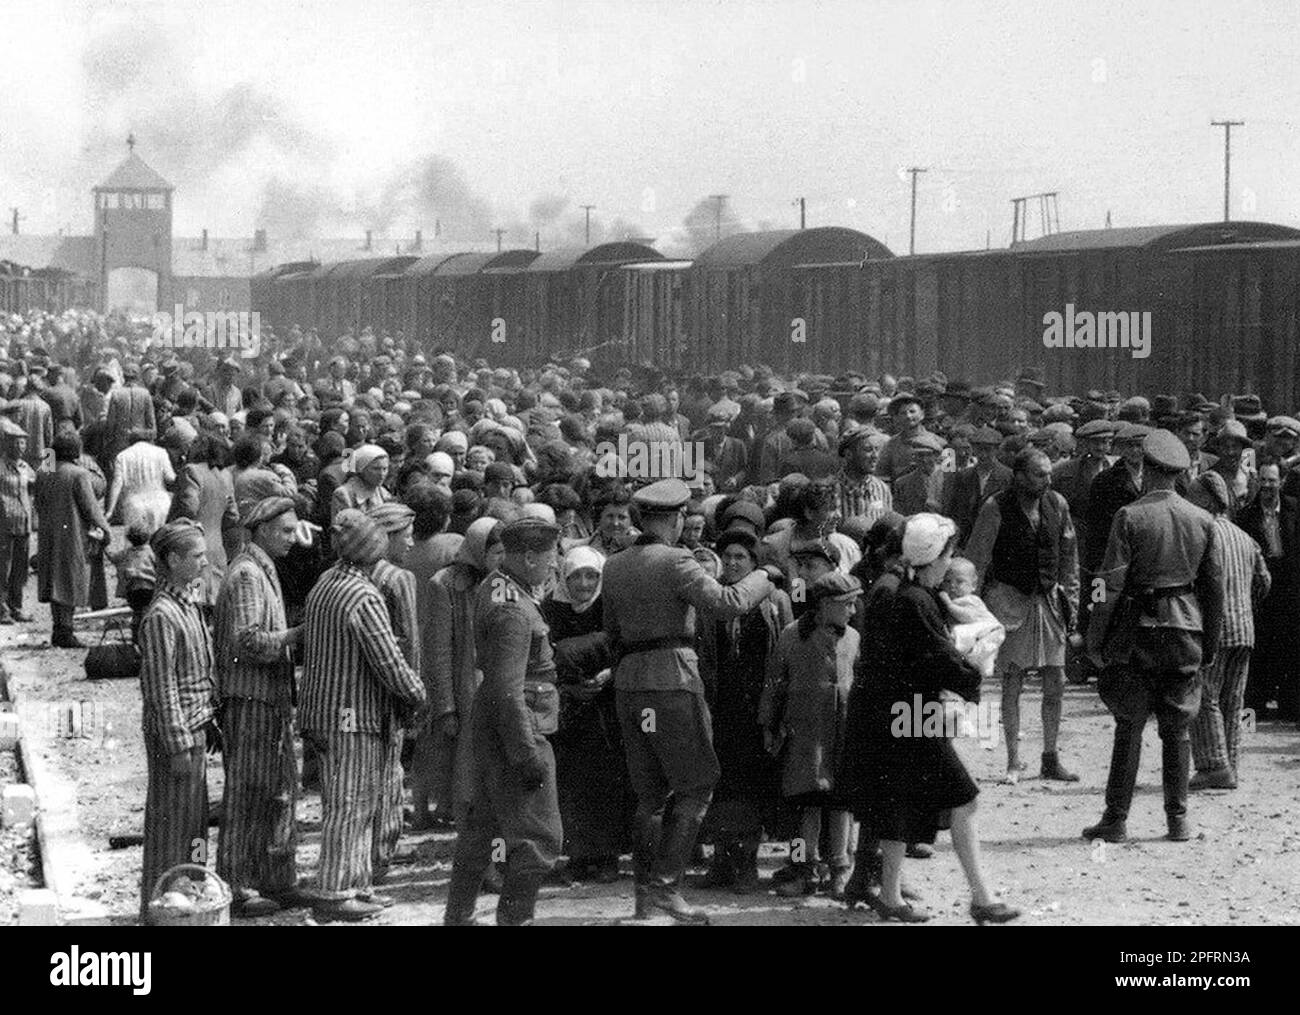 'Selection' of Hungarian Jews on the ramp at Auschwitz-II-Birkenau in German-occupied Poland, May/June 1944, during the final phase of the Holocaust. Stock Photo